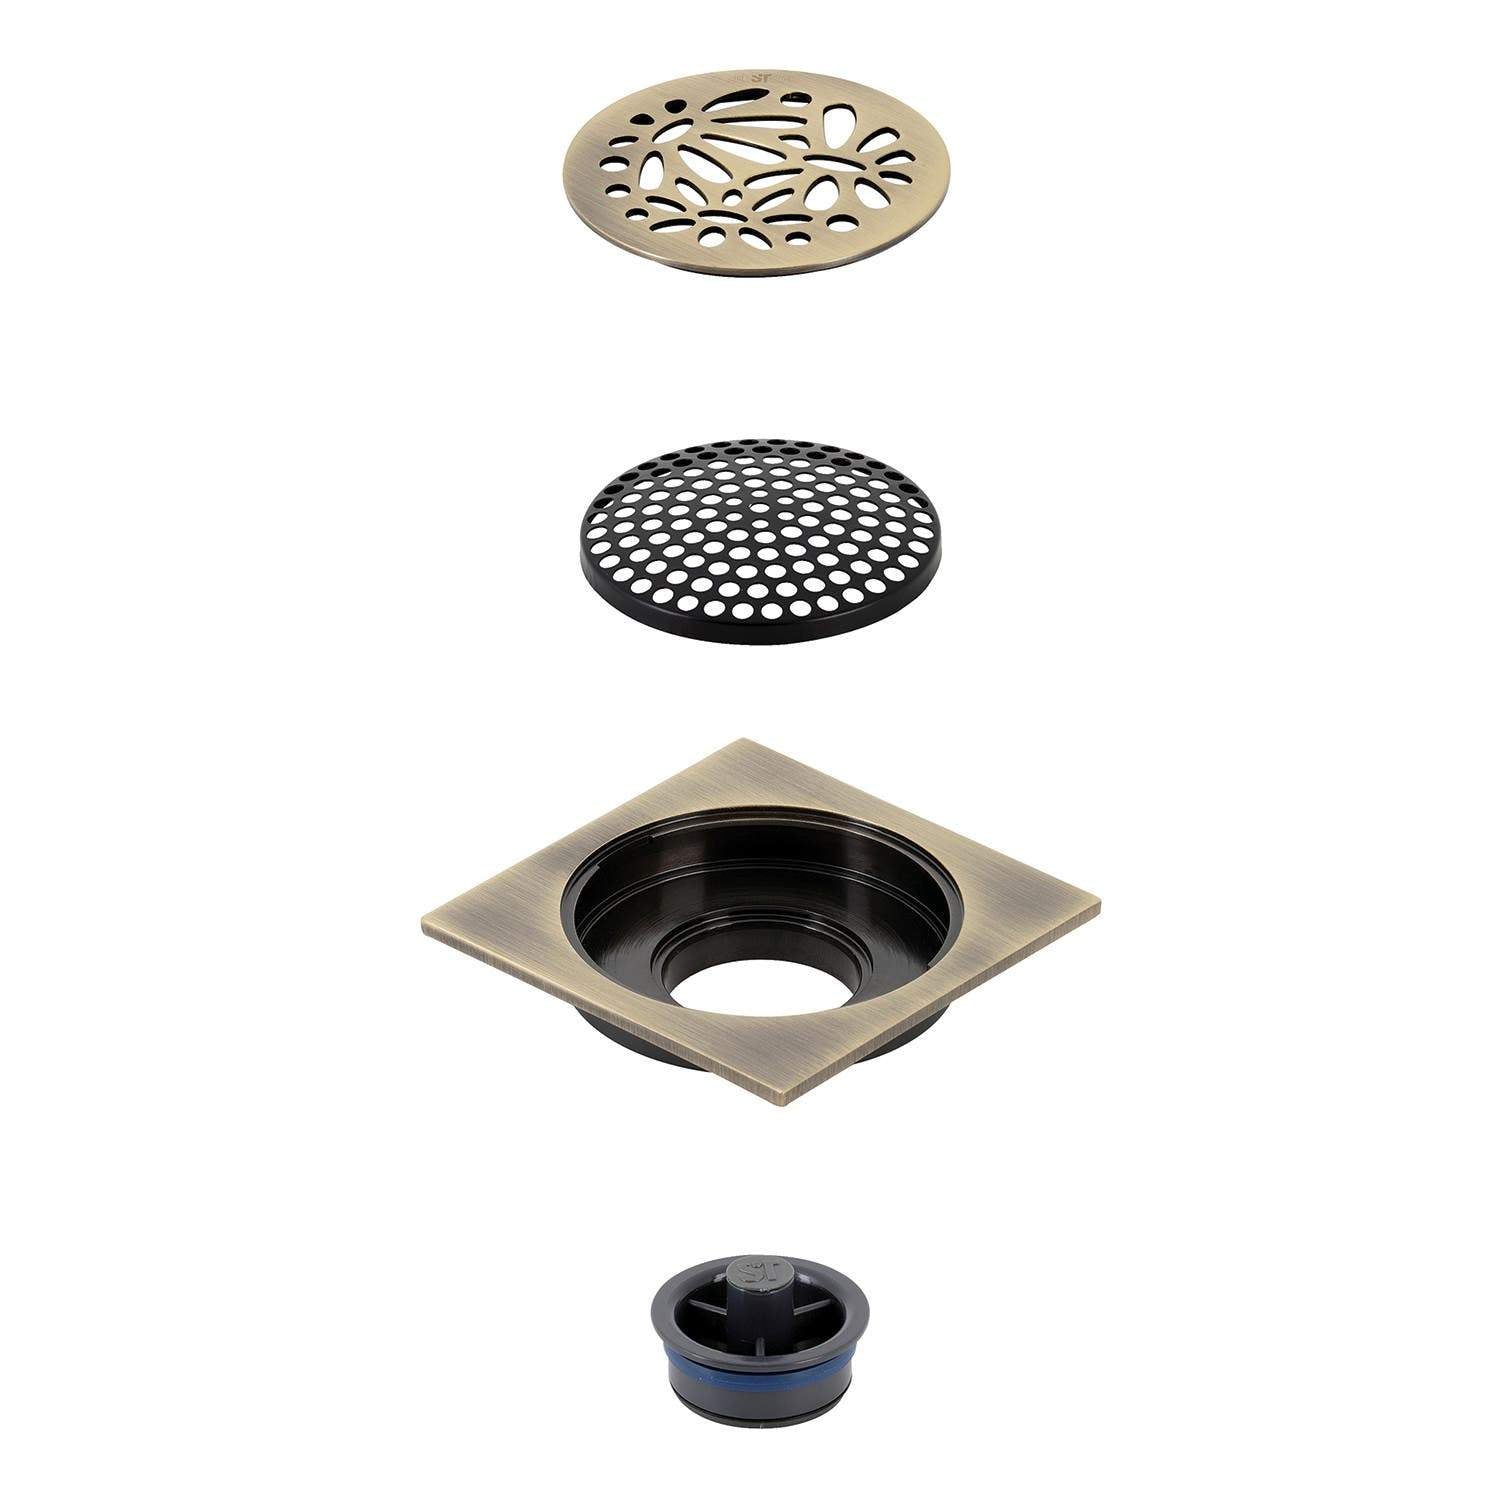 Kingston Brass Watercourse BSF4262PB 4-Inch Square Grid Shower Drain with  Hair Catche